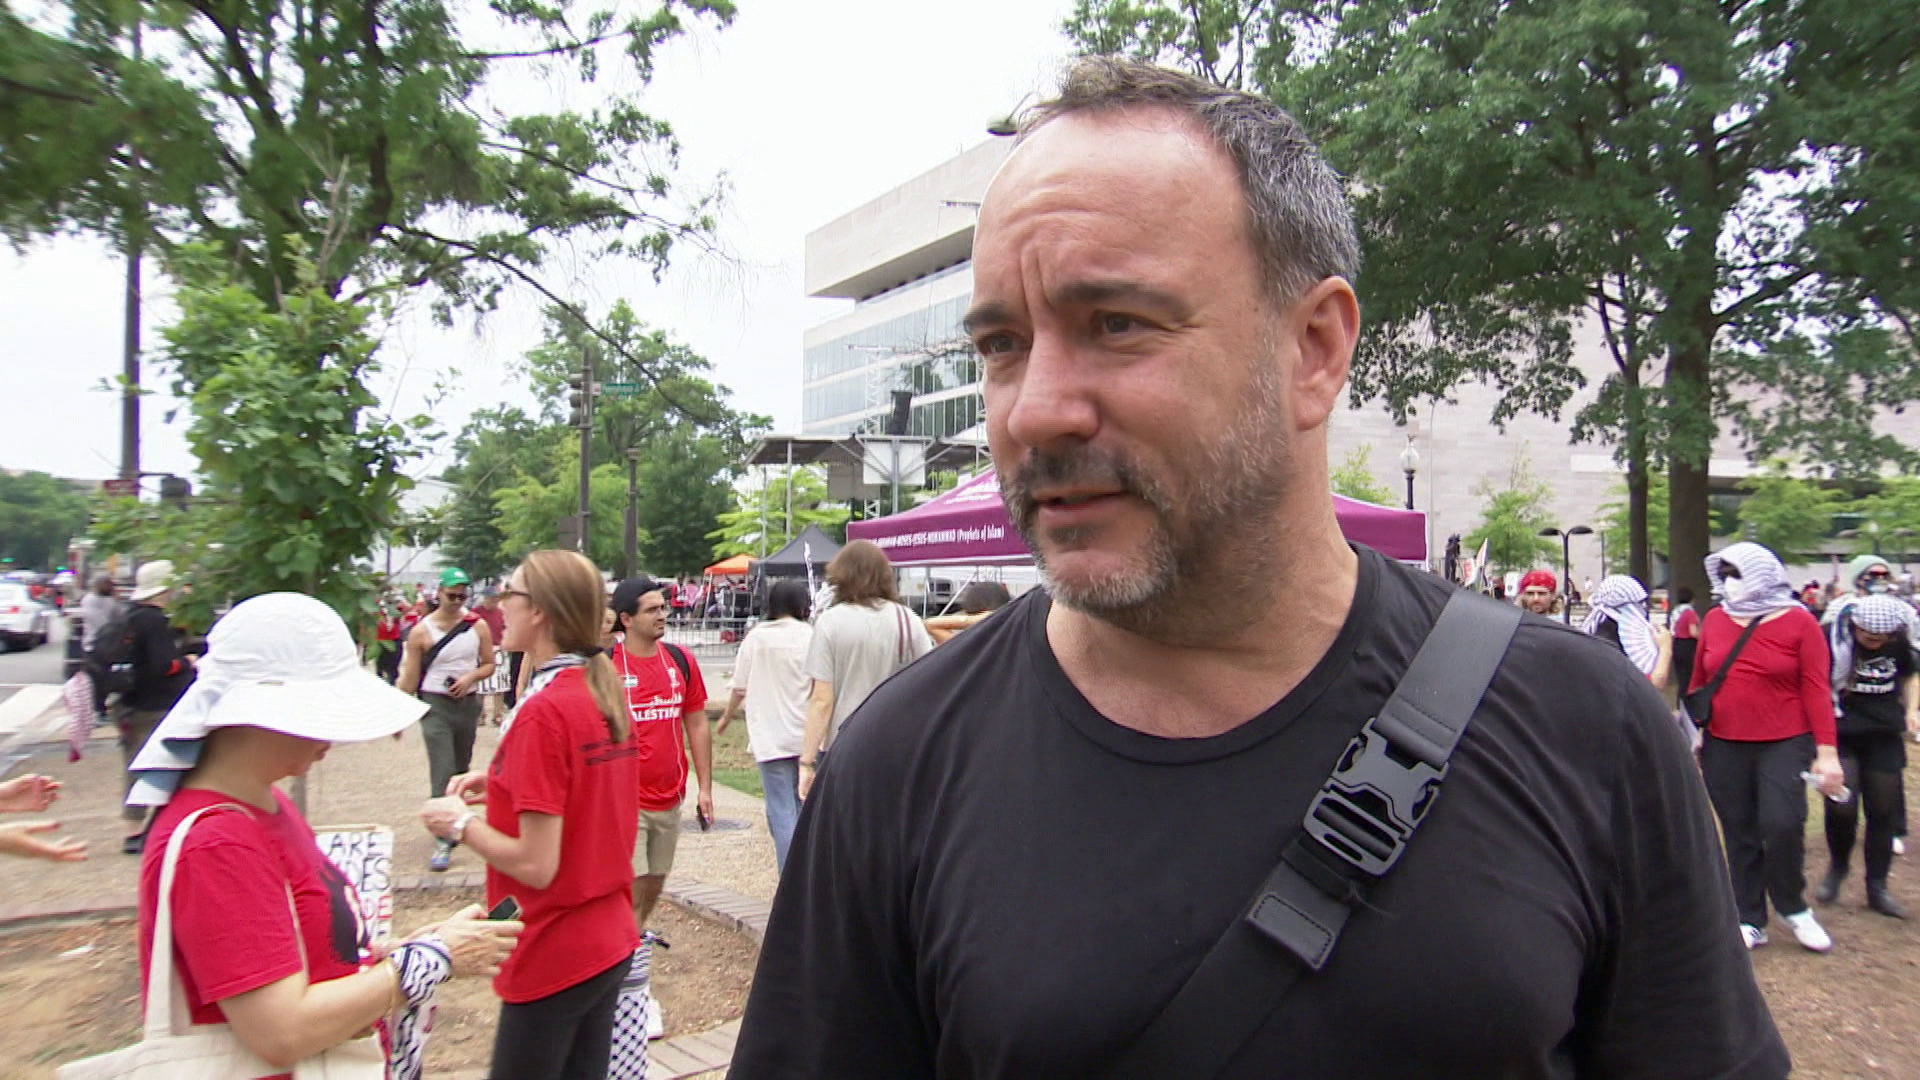 Musician Dave Matthews slams disgusting support for Netanyahu in US | Israel-Palestine conflict [Video]